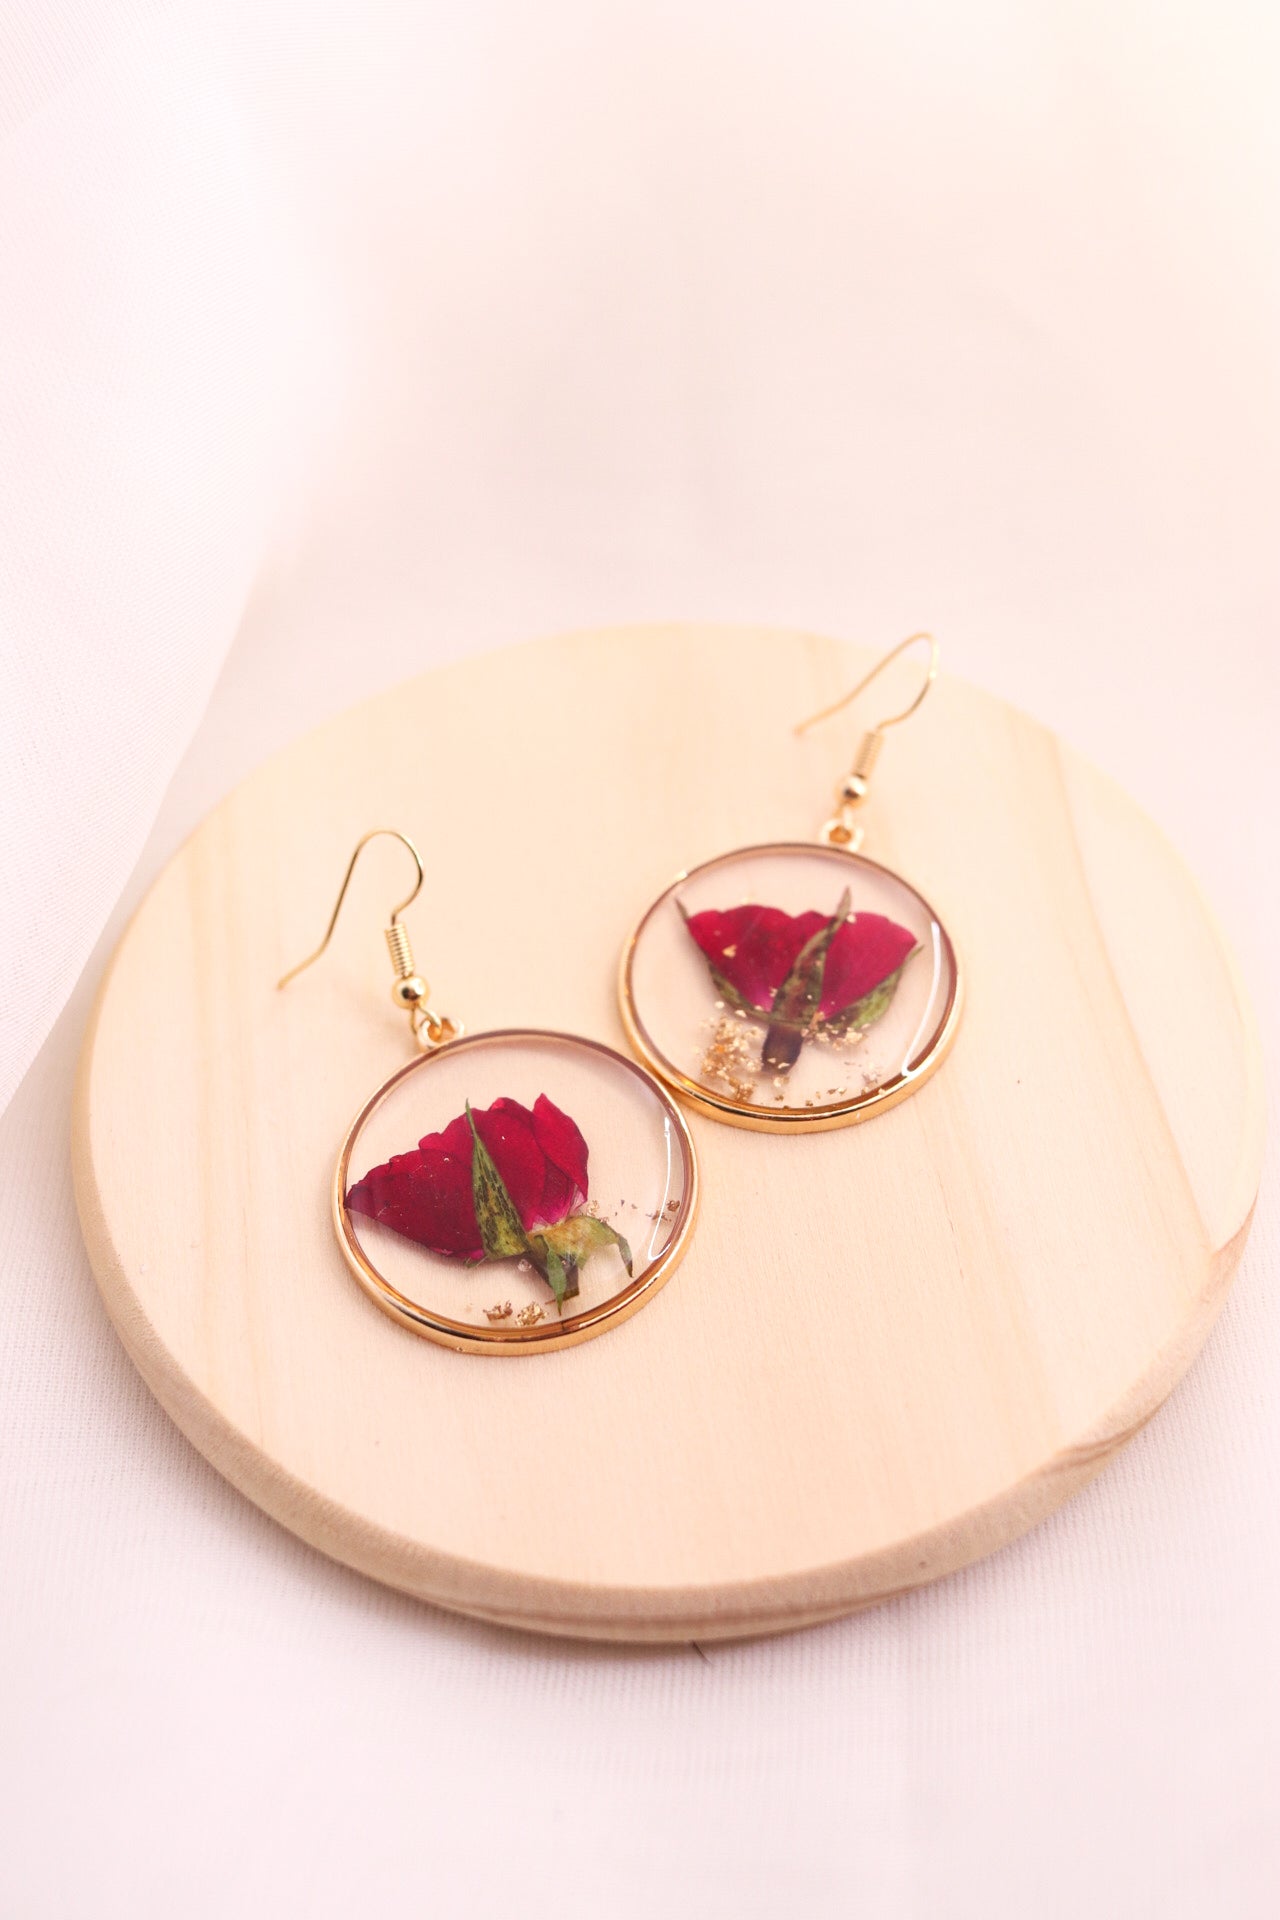 Pressed Red Rose Flower Earrings, Real Dried Wildflower Resin Earrings, Botanical Nature Jewelry, Perfect Christmas Gift For Her